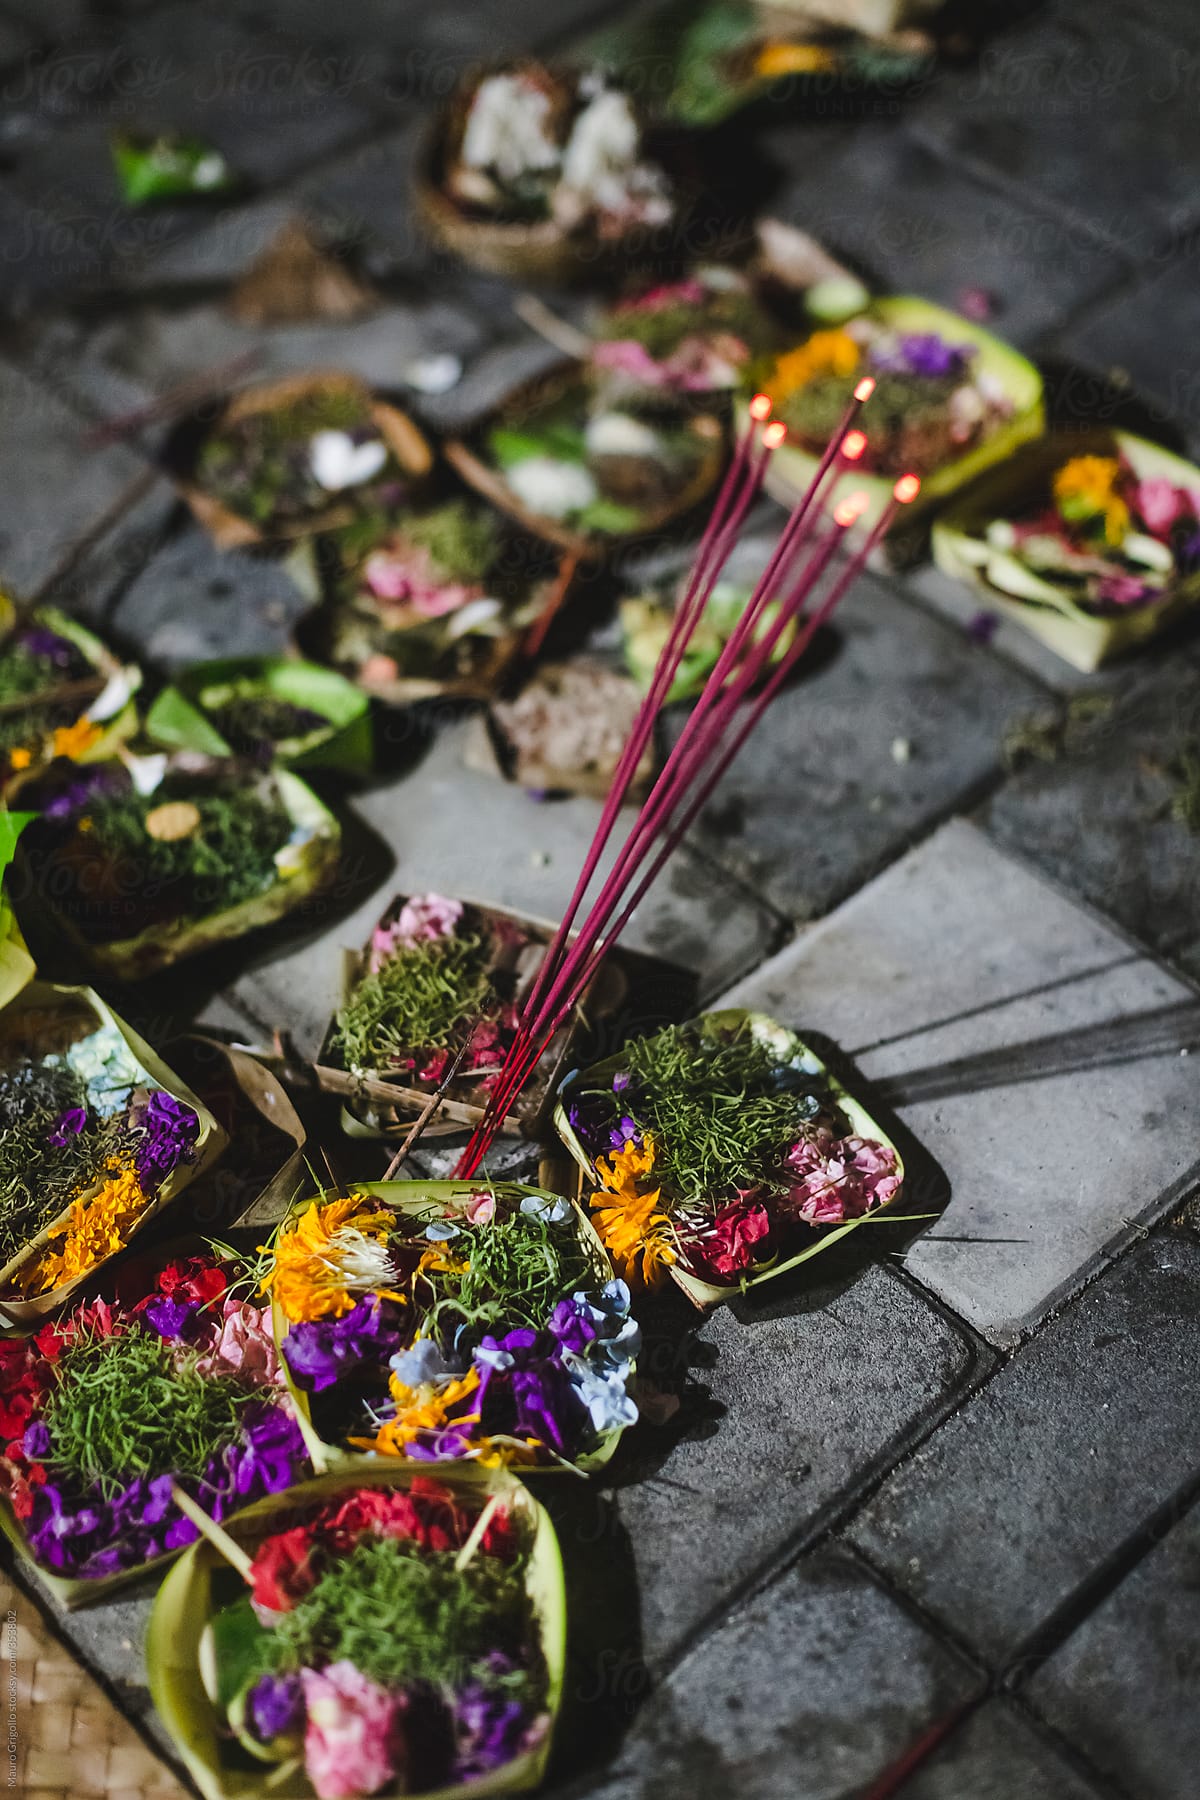 Flower Offering in a Temple in Bali, Indonesia